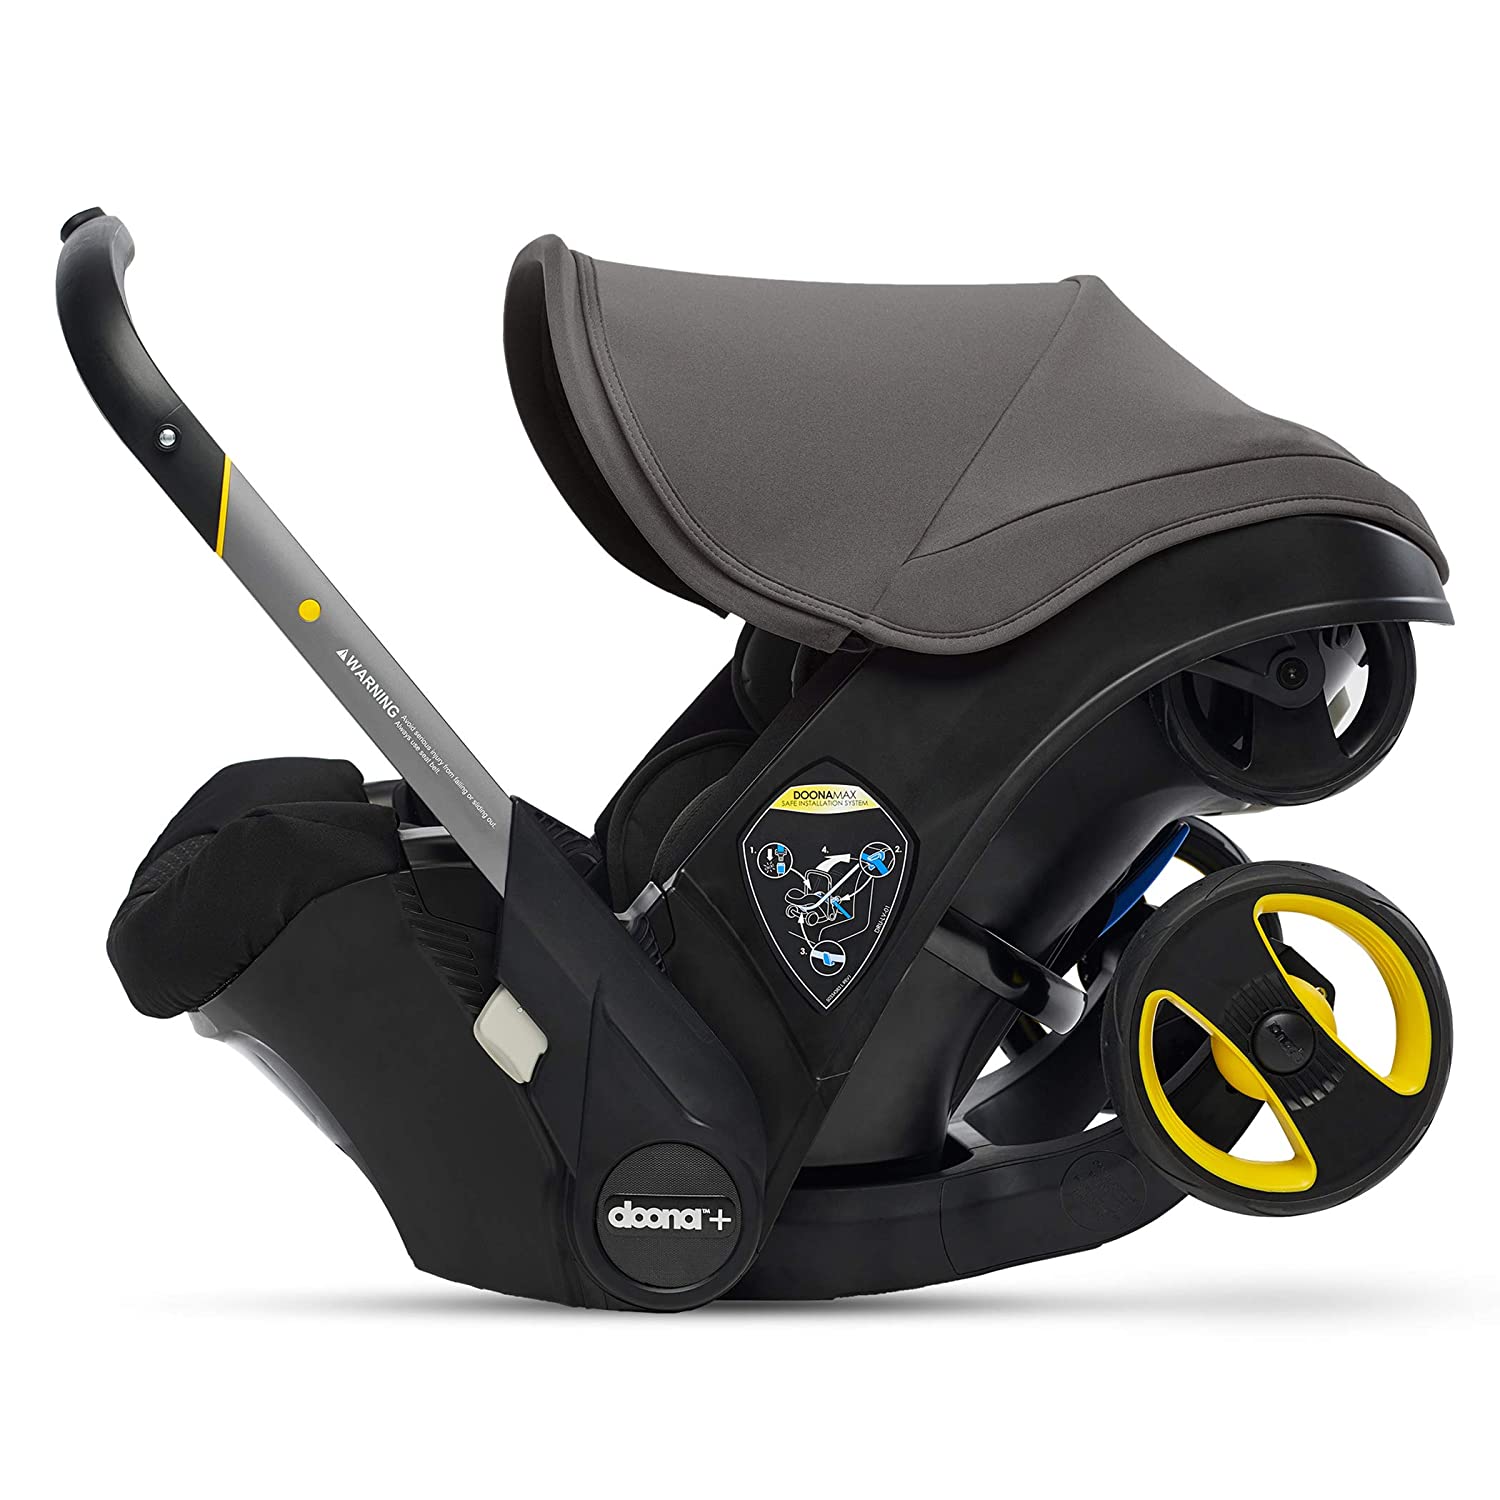 Doona Car Seat & Stroller Collections